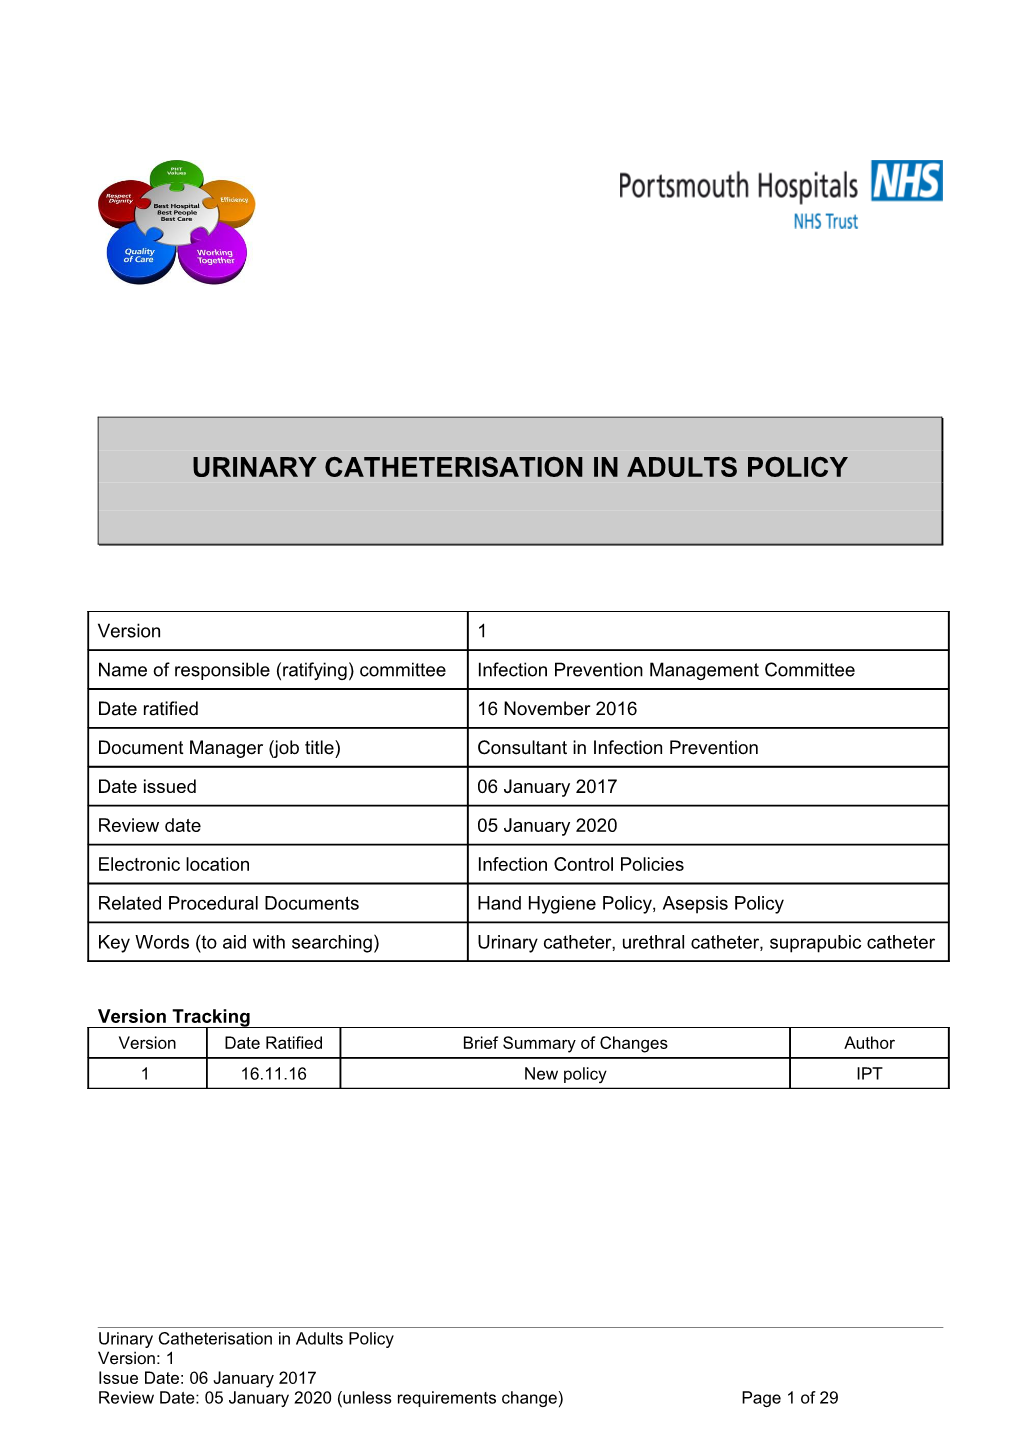 Urinary Catheterisation in Adults Policy